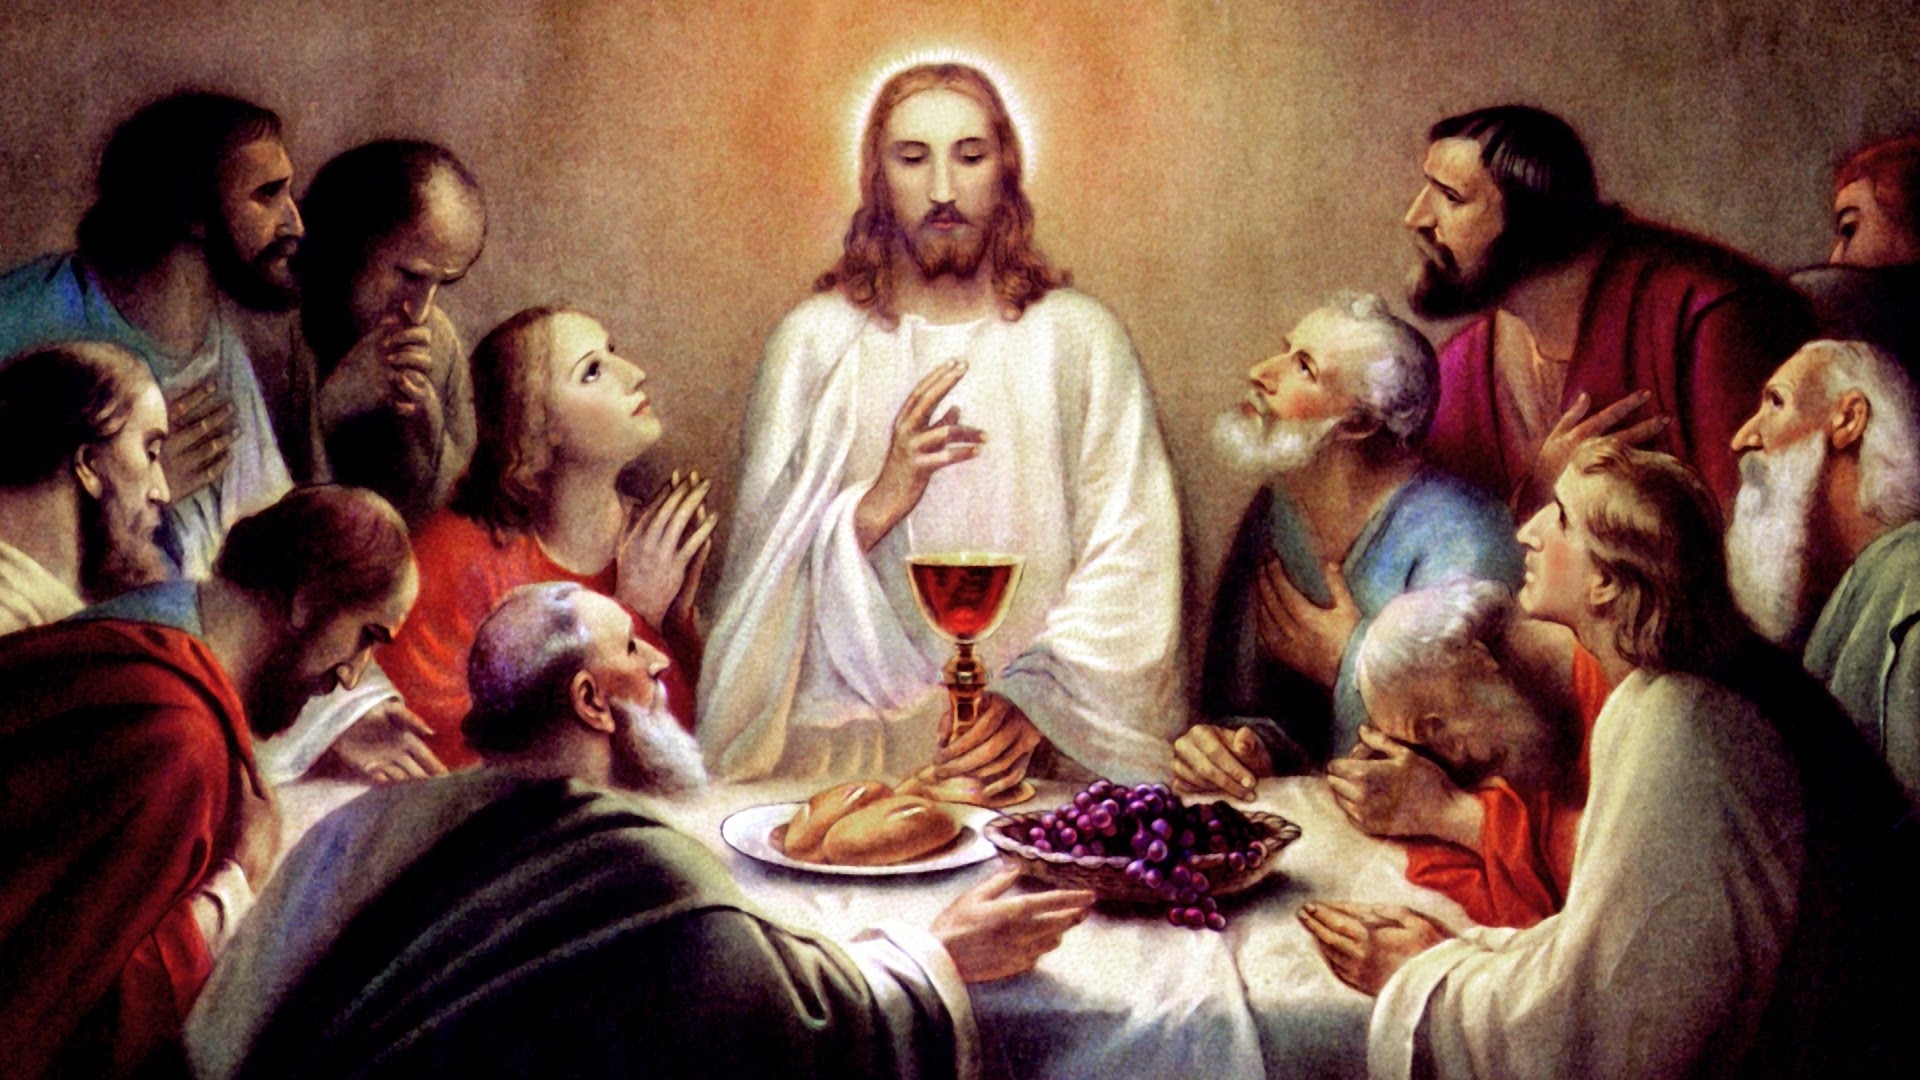 10 New And Most Recent Jesus Last Supper Picture for Desktop Computer with ...